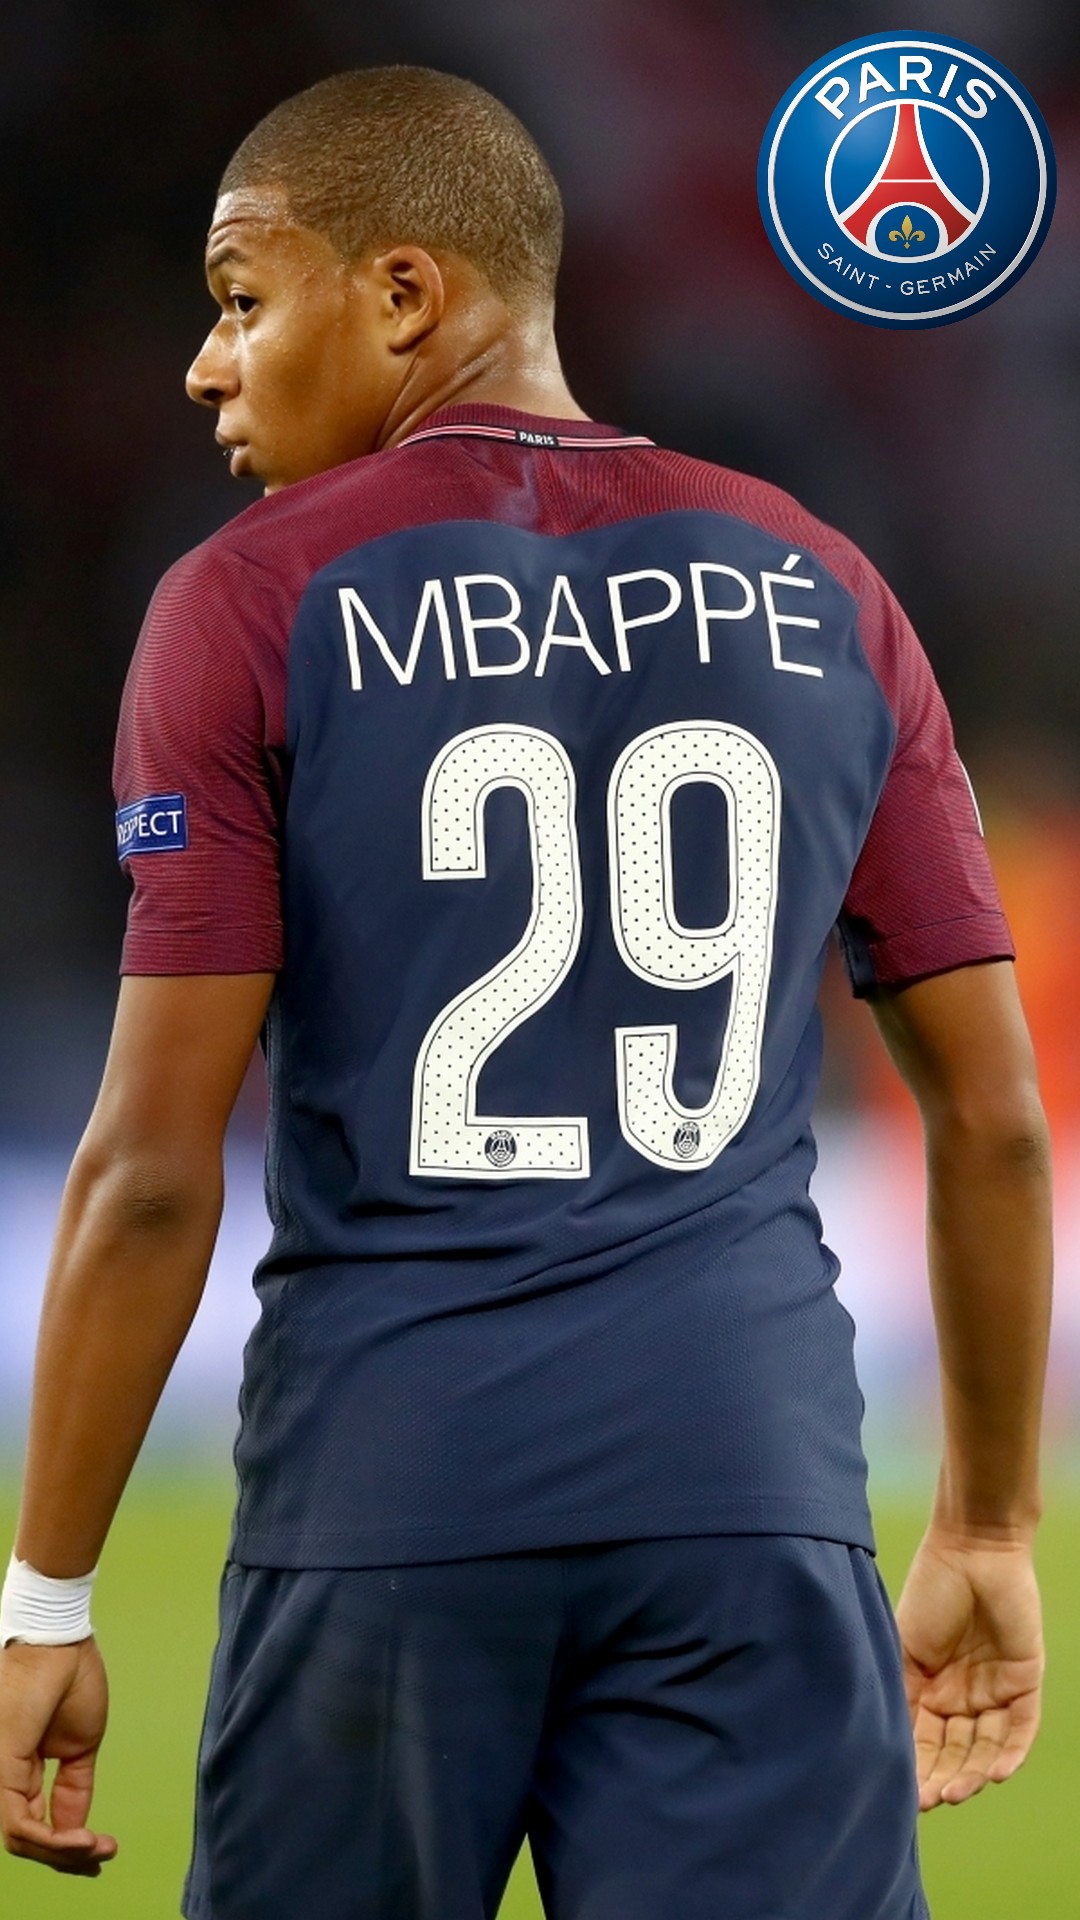 PSG Kylian Mbappe iPhone Wallpapers With Resolution 1080X1920 pixel. You can make this wallpaper for your Mac or Windows Desktop Background, iPhone, Android or Tablet and another Smartphone device for free